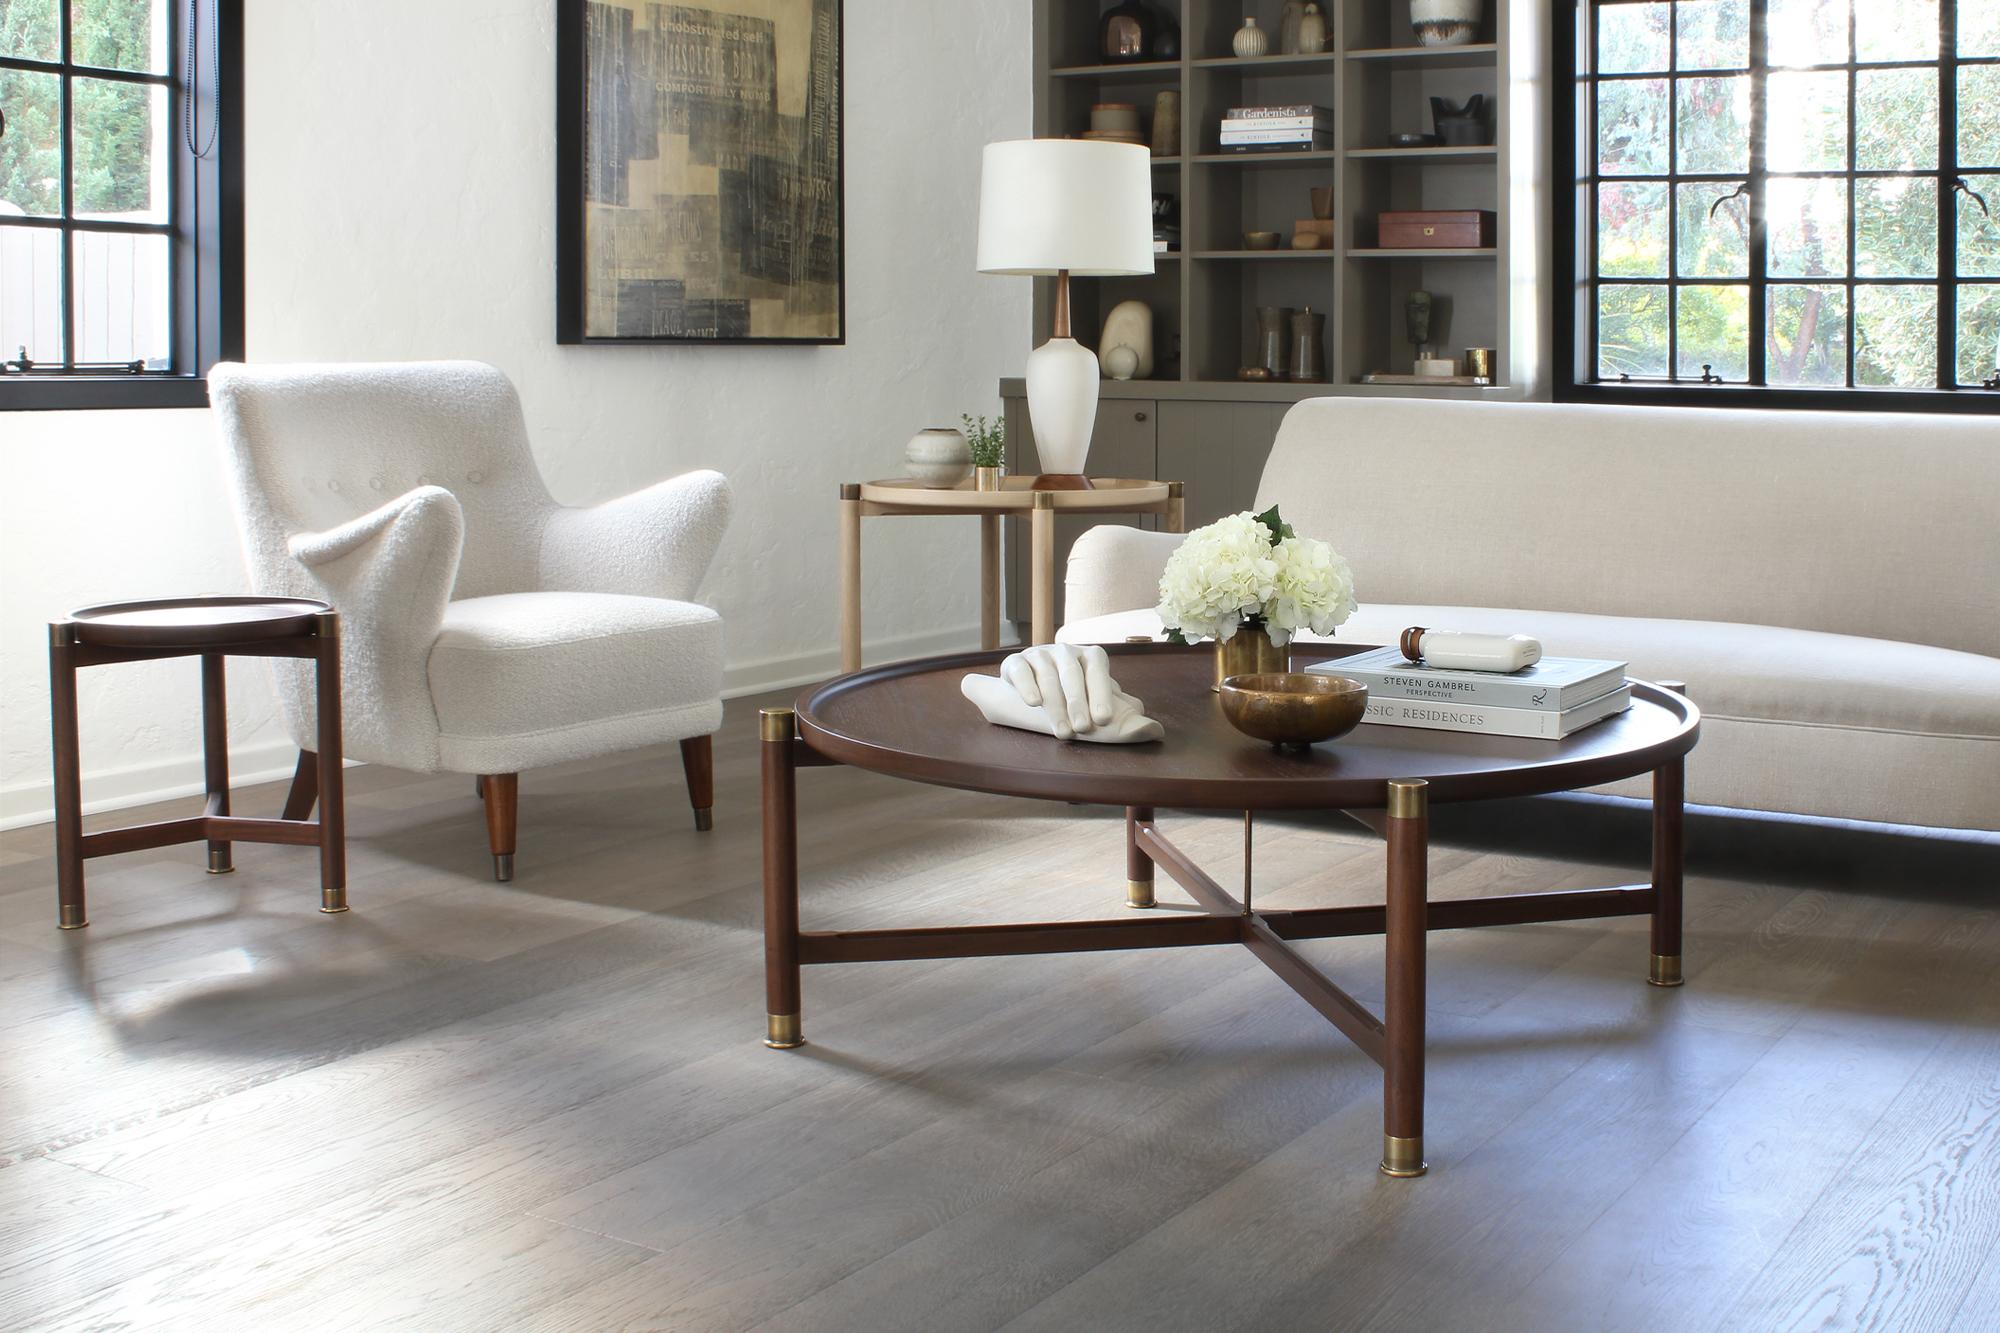 The Otto coffee table is a handsome, generously proportioned table with a timeless form.
Available in walnut or oak, it features a round coupe top, substantial antique brass fittings, and sleek chamfered stretchers. The epitome of understated